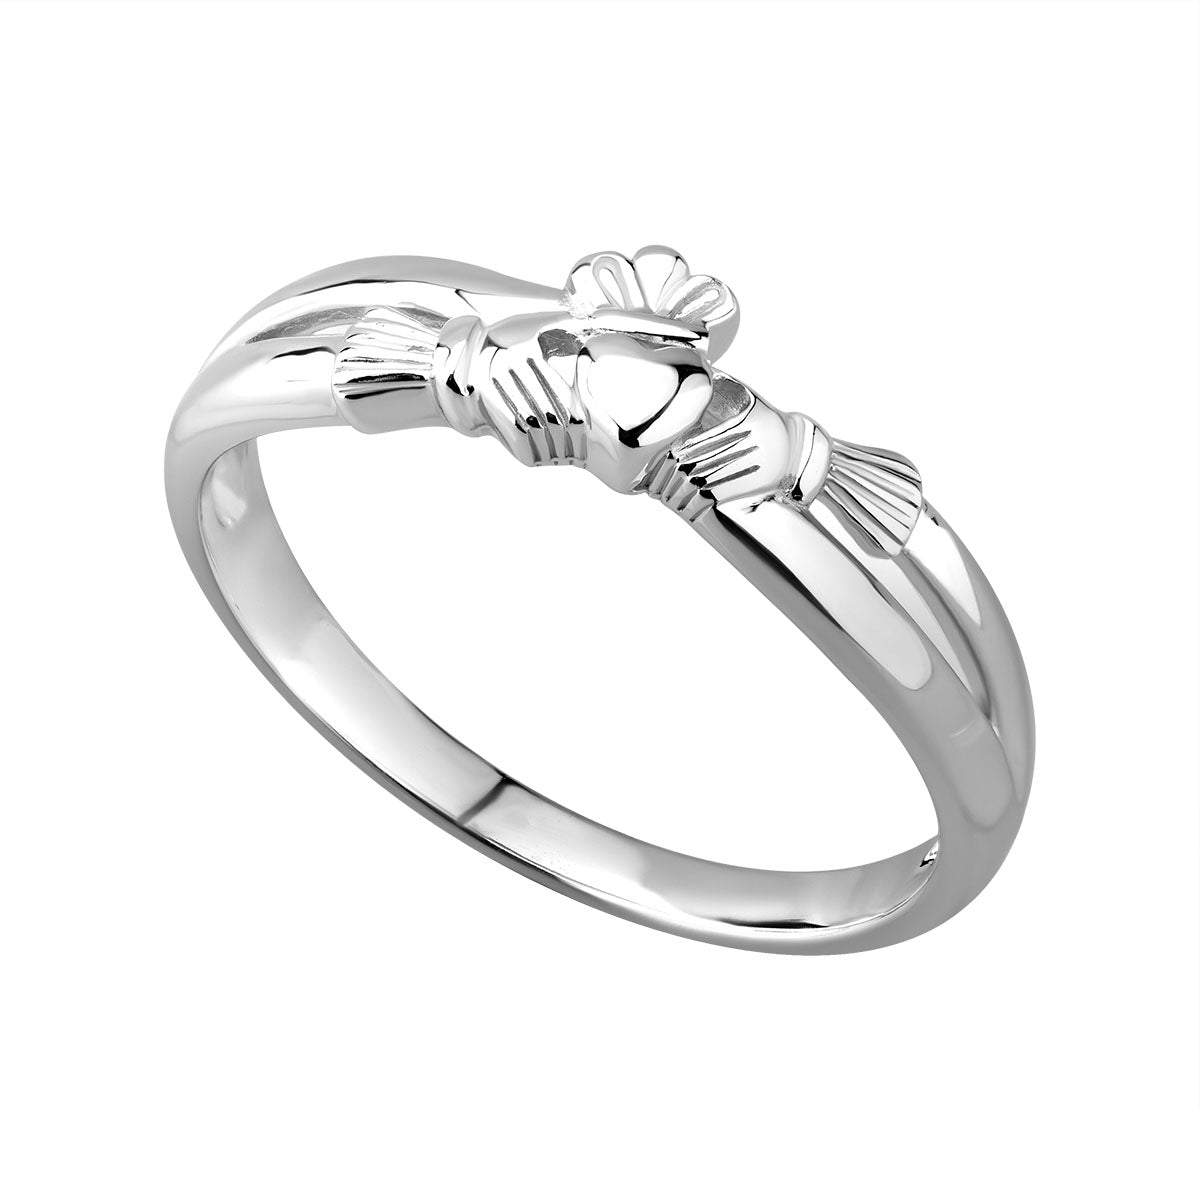 sterling silver claddagh kiss ring s2750 from Solvar